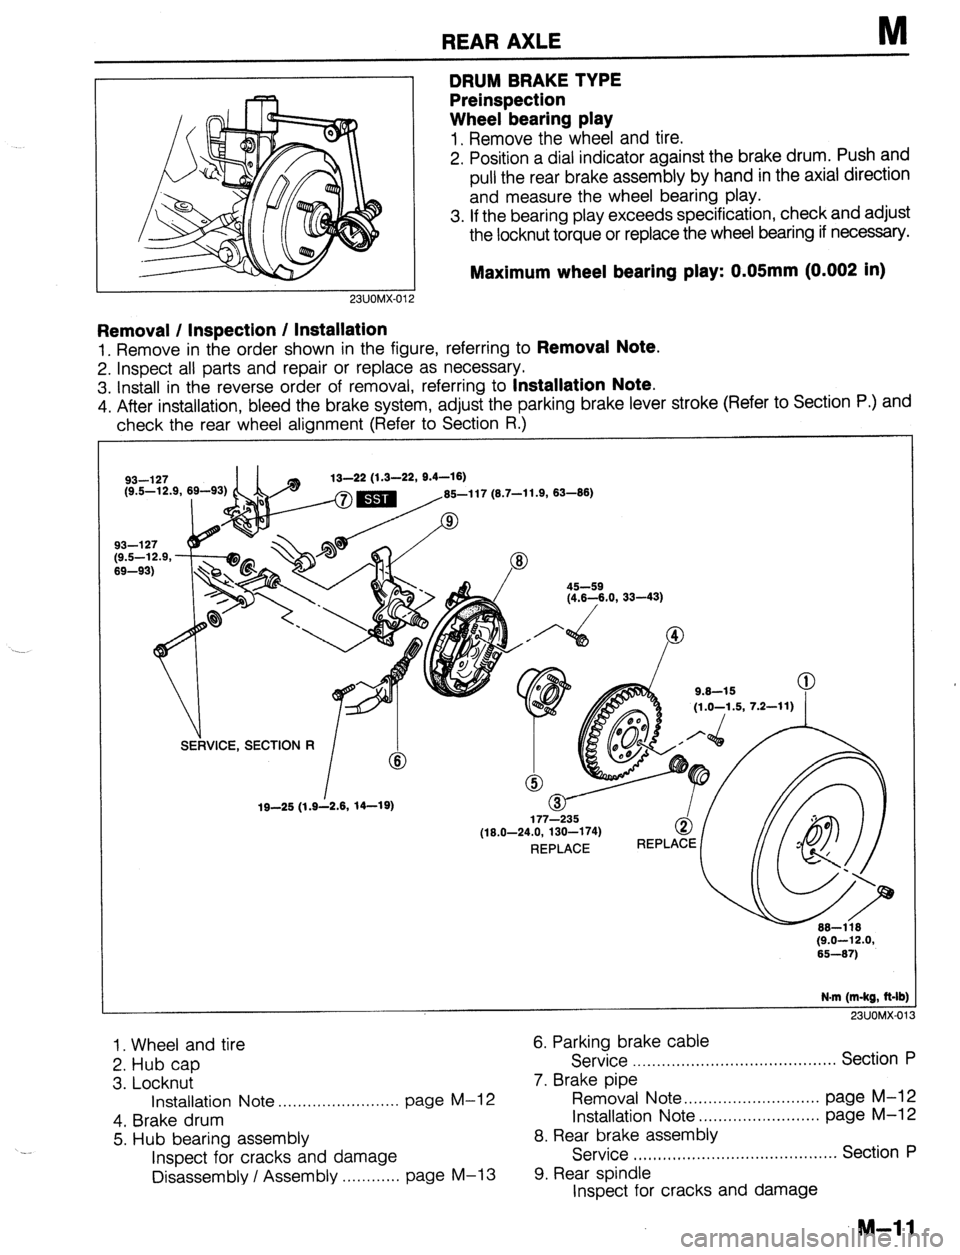 MAZDA 323 1989  Factory Repair Manual REAR AXLE M 
L.3”“I”lh-” I 
Removal / Inspection / Installation 
1. Remove in the order shown in the figure, referring to Removal Note. 
2. Inspect all parts and repair or replace as necessary